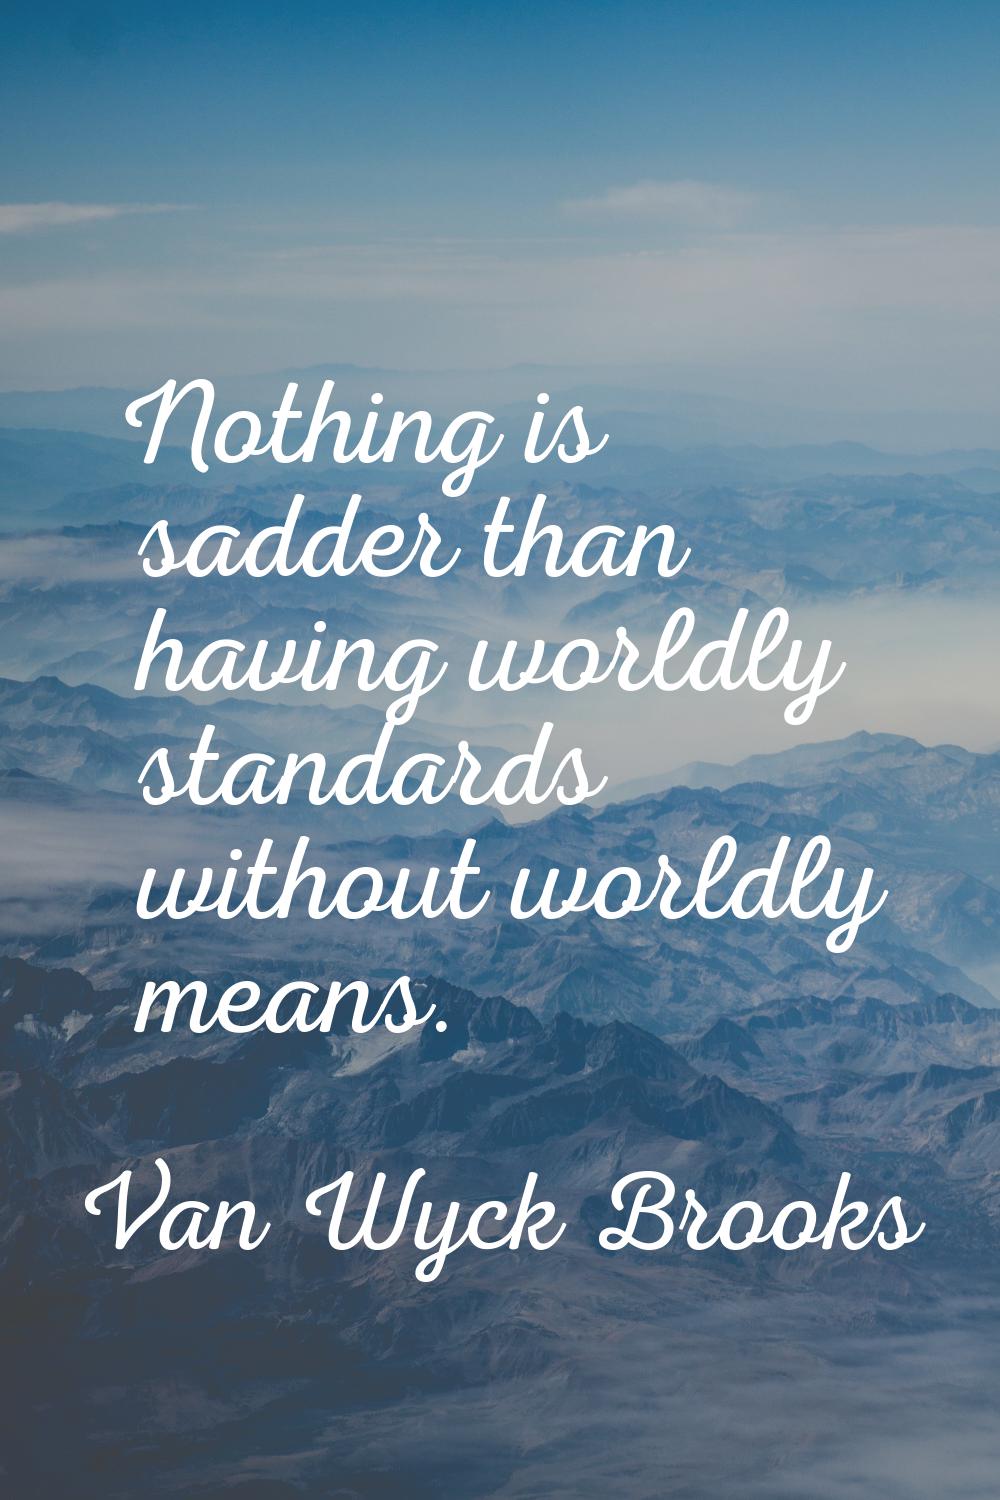 Nothing is sadder than having worldly standards without worldly means.